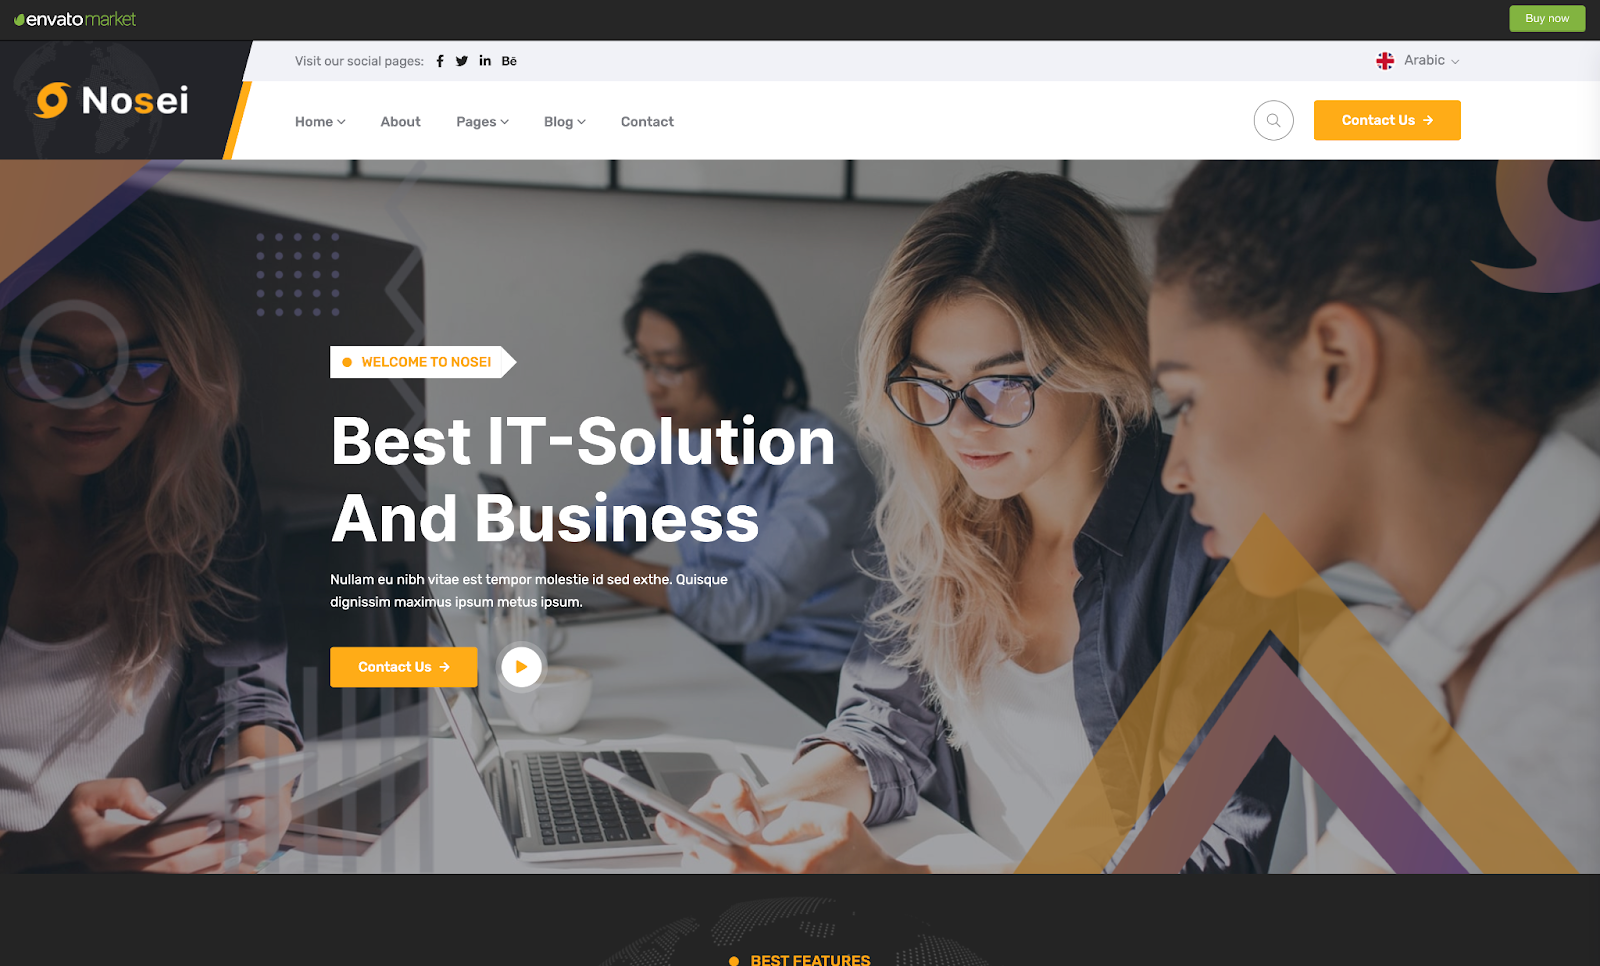 Nosei is a responsive Bootstrap Website template you can use for any number of web design projects